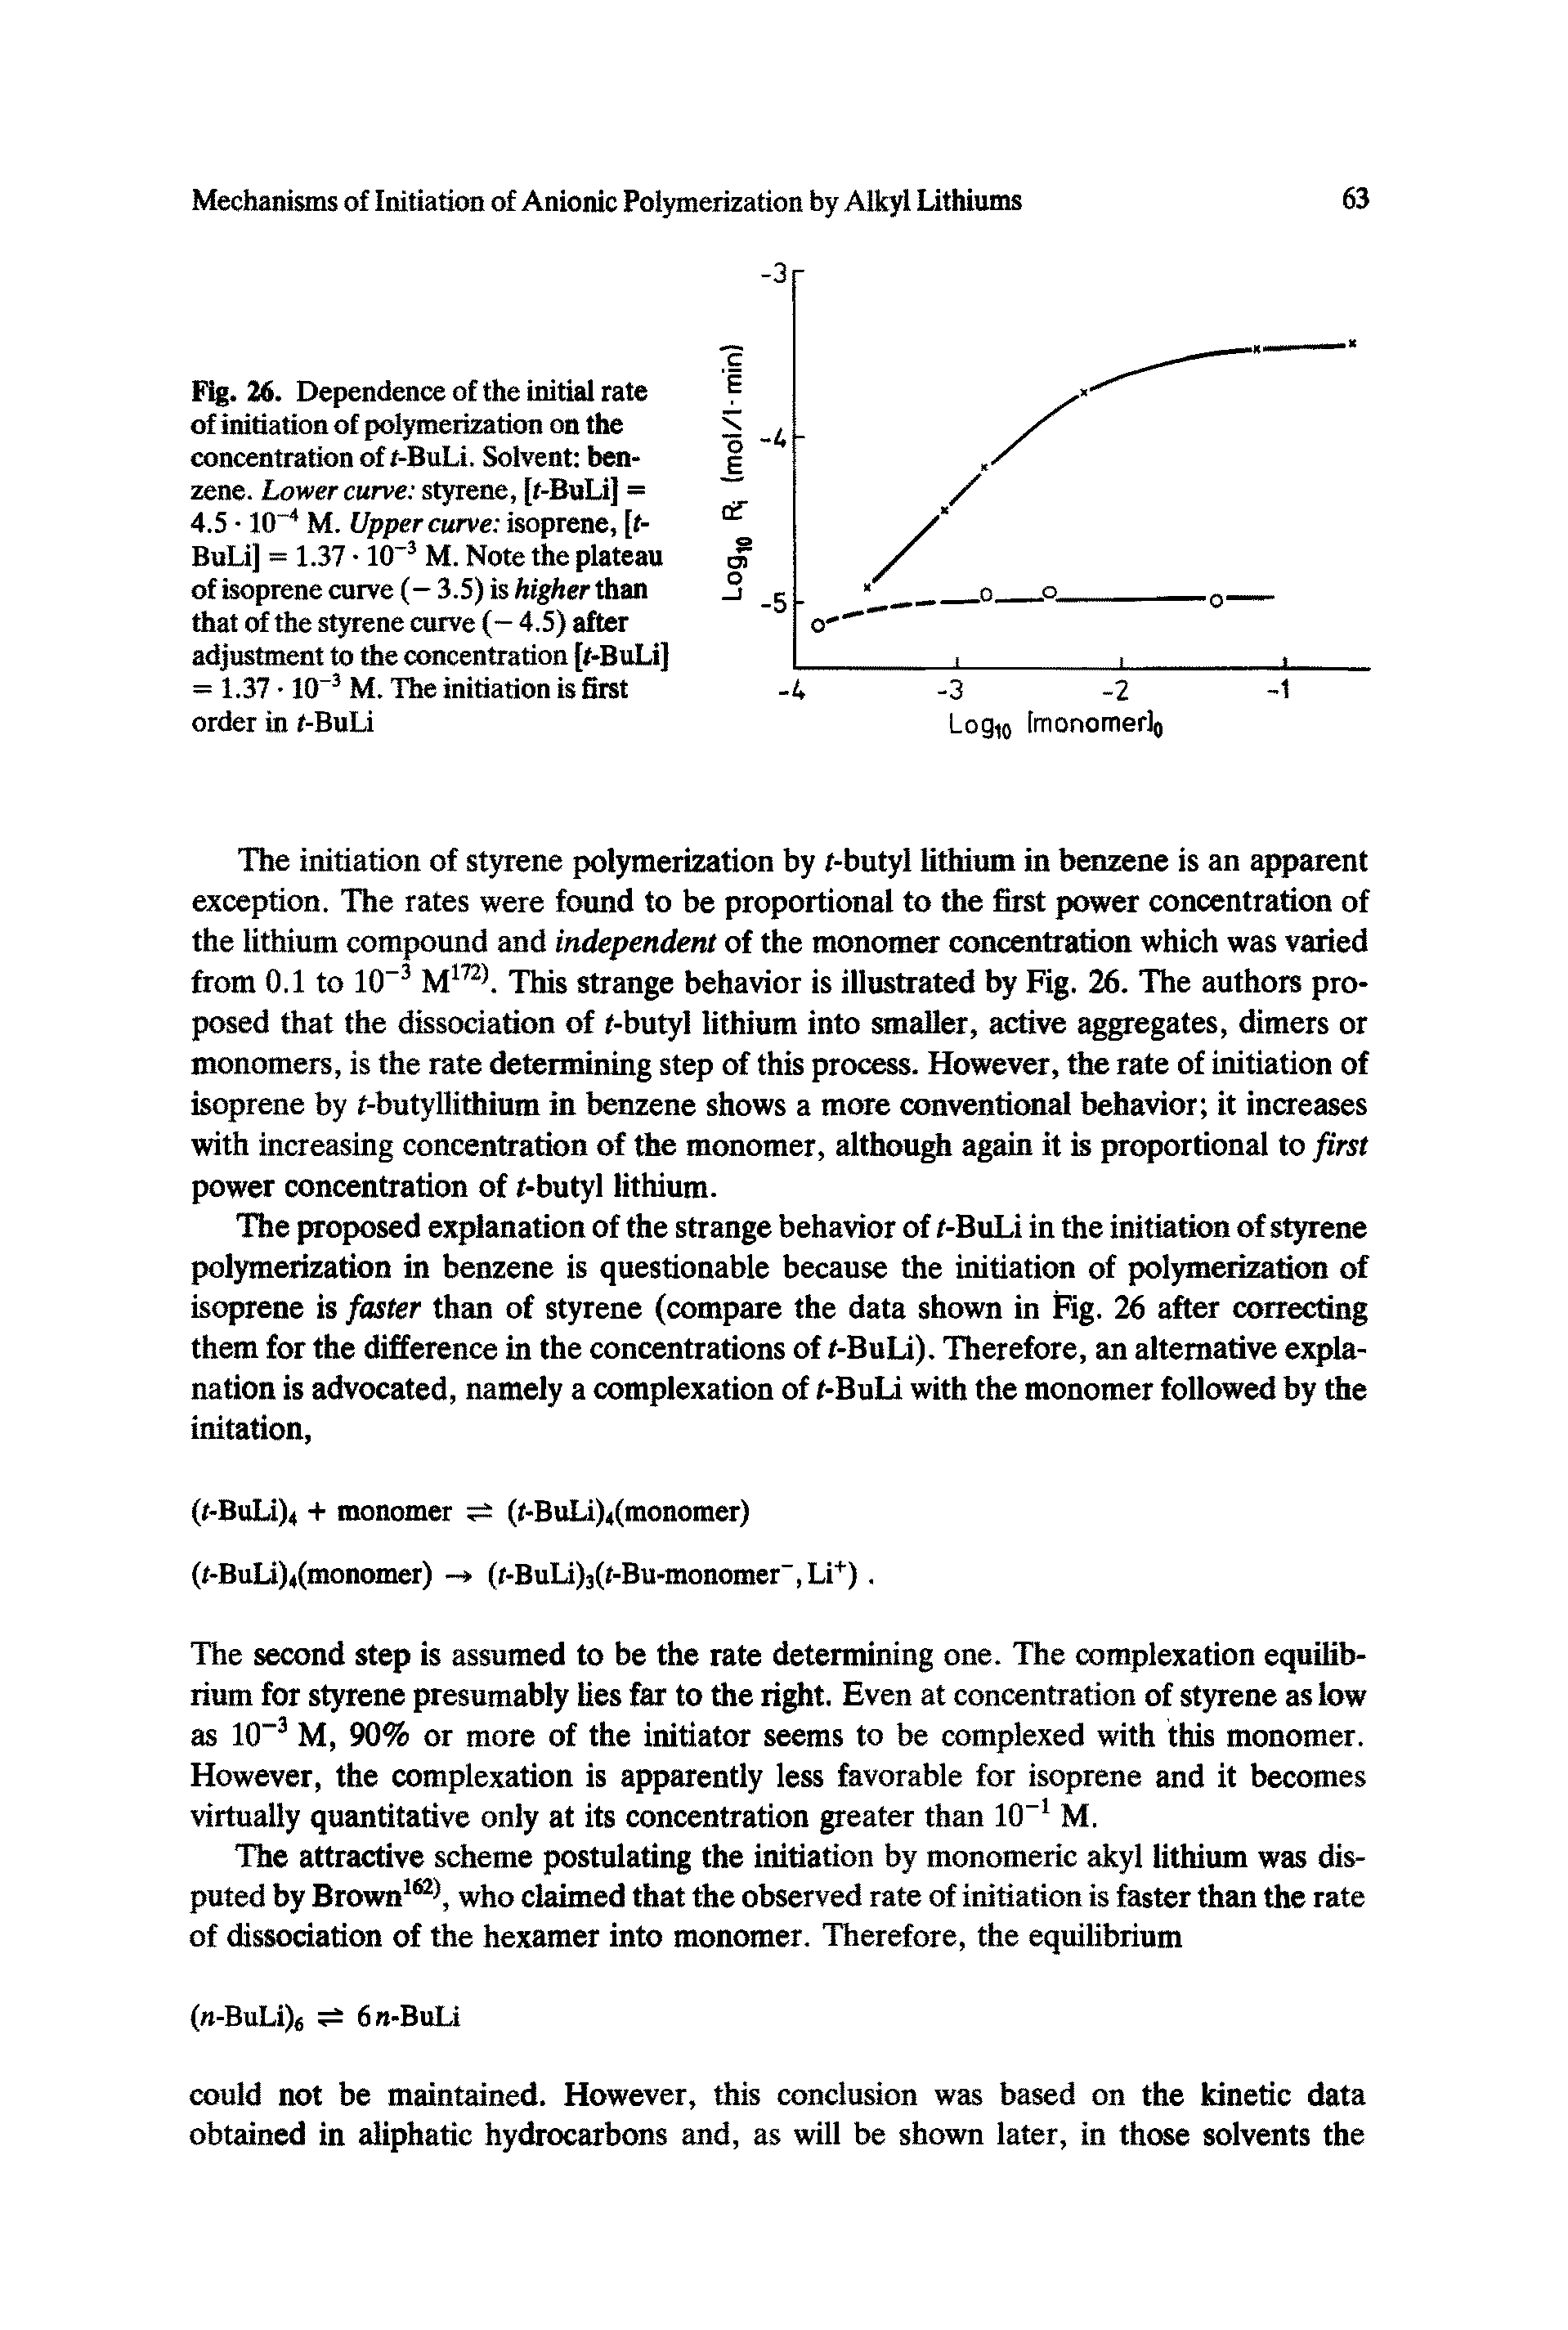 Fig. 26. Dependence of the initial rate of initiation of polymerization on the concentration of f-BuLi. Solvent benzene. Lower curve styrene, [t-BuLi] = 4.5 10 4 M. Upper curve isoprene, [f-BuLi] = 1.37 10 3 M. Note the plateau of isoprene curve (— 3.5) is higher than that oif the styrene curve (- 4,5) after adjustment to the concentration [r-BuLi] = 1.37 10-3 M. The initiation is first order in f-BuLi...